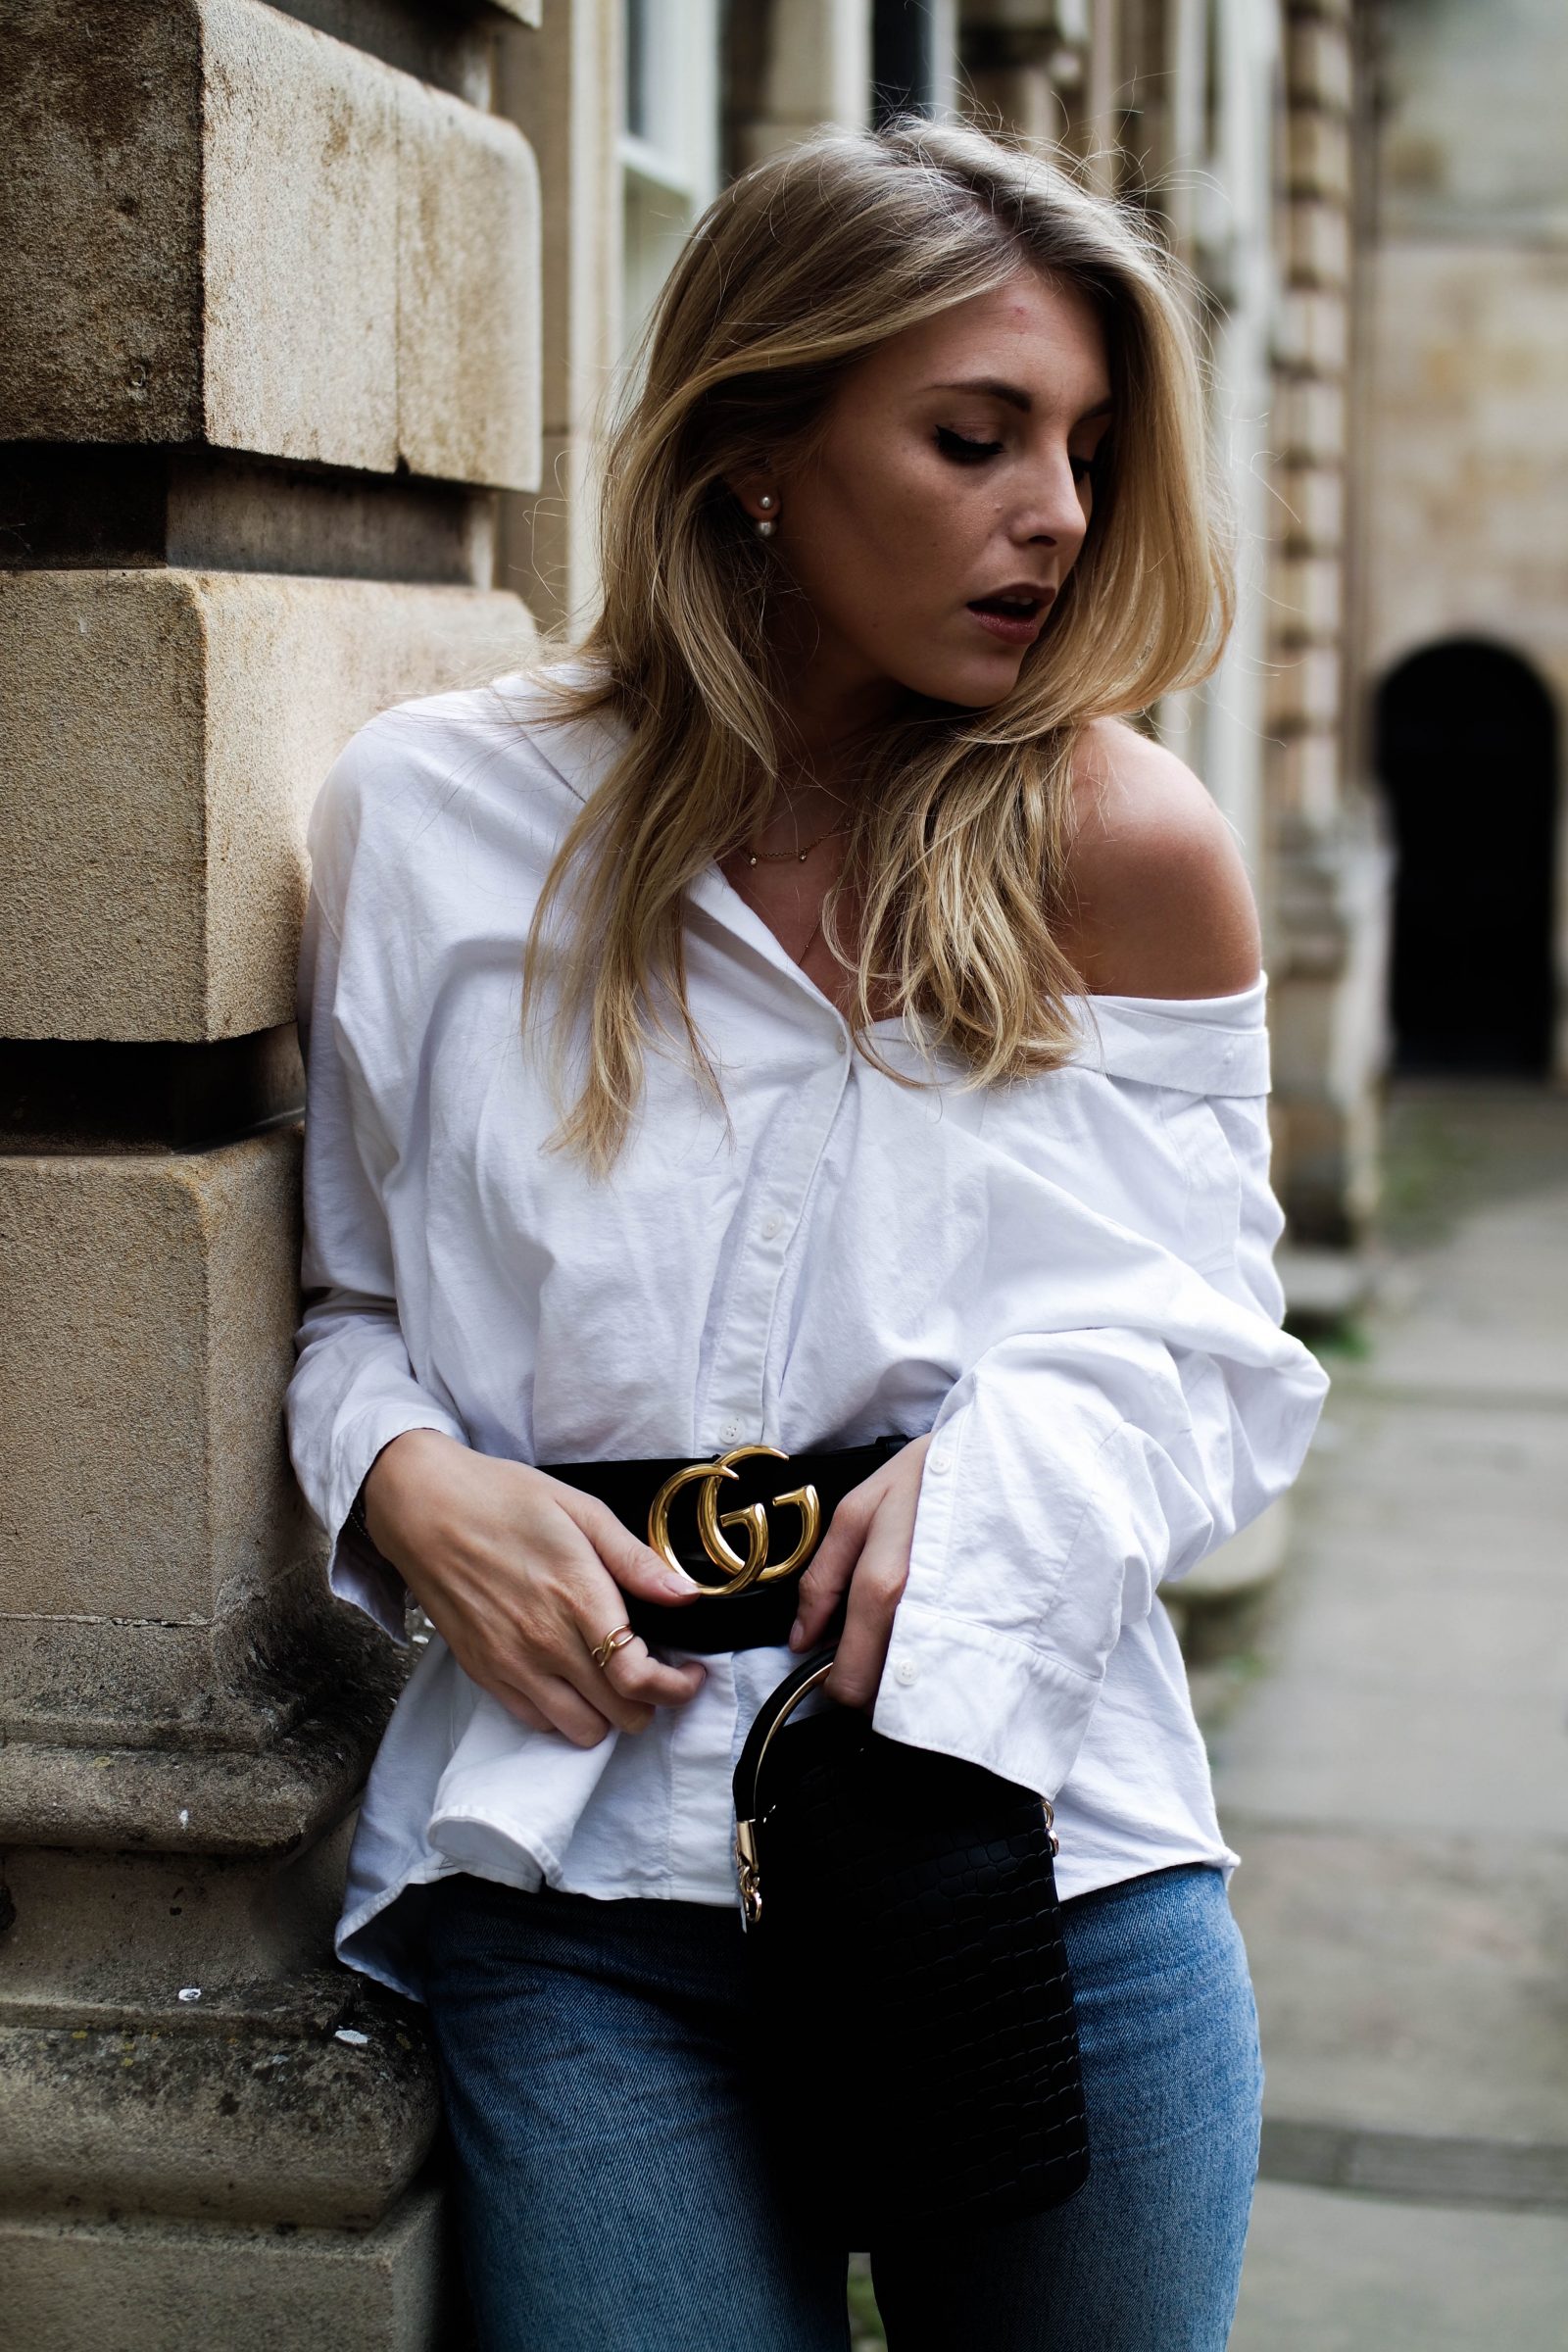 The New Way To Wear Your Statement Belt - Fashion Blogger Spring Styling